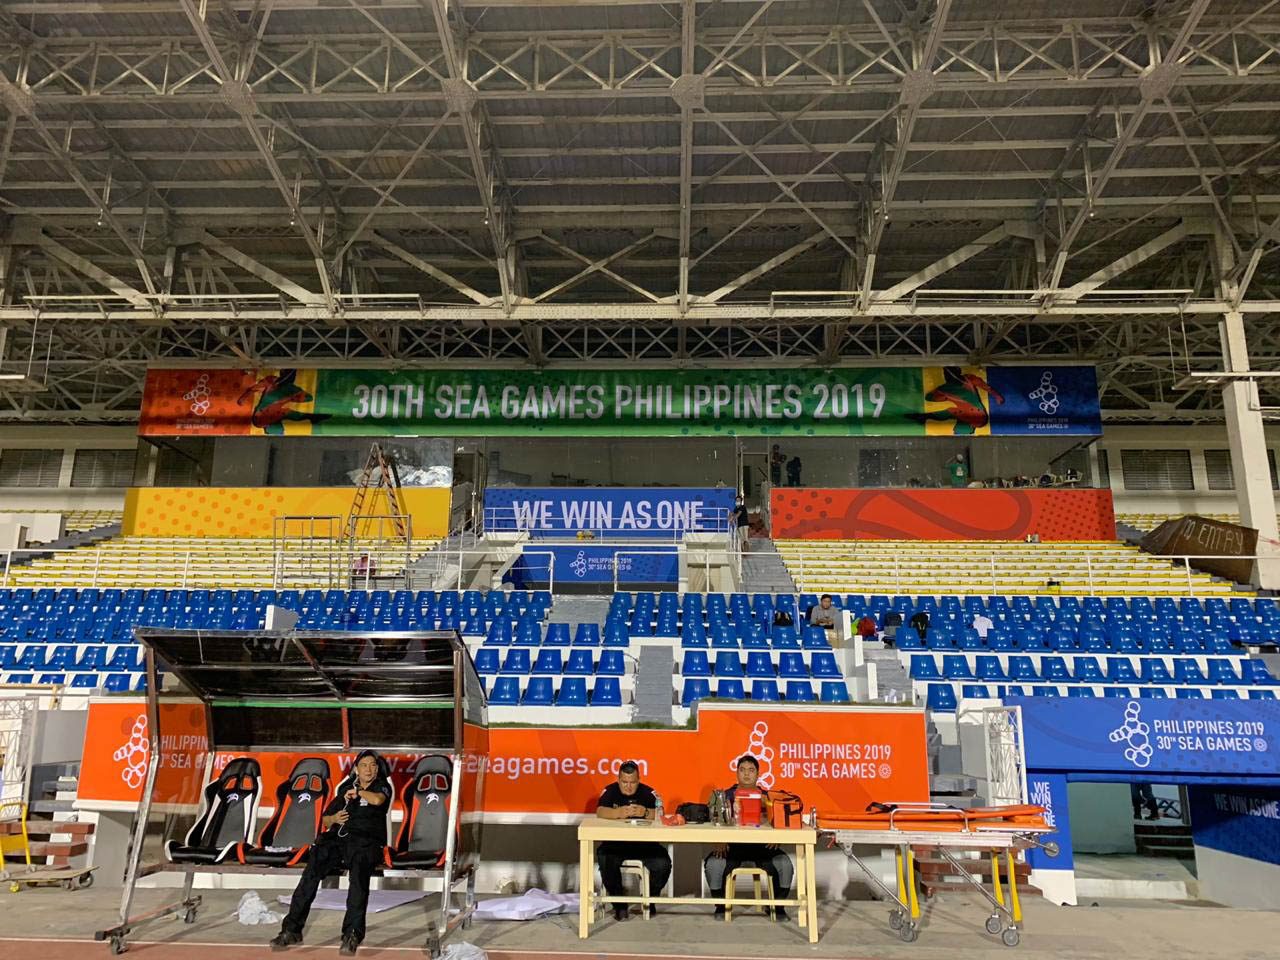 Venues, budget, sports: What you need to know about SEA Games 2019